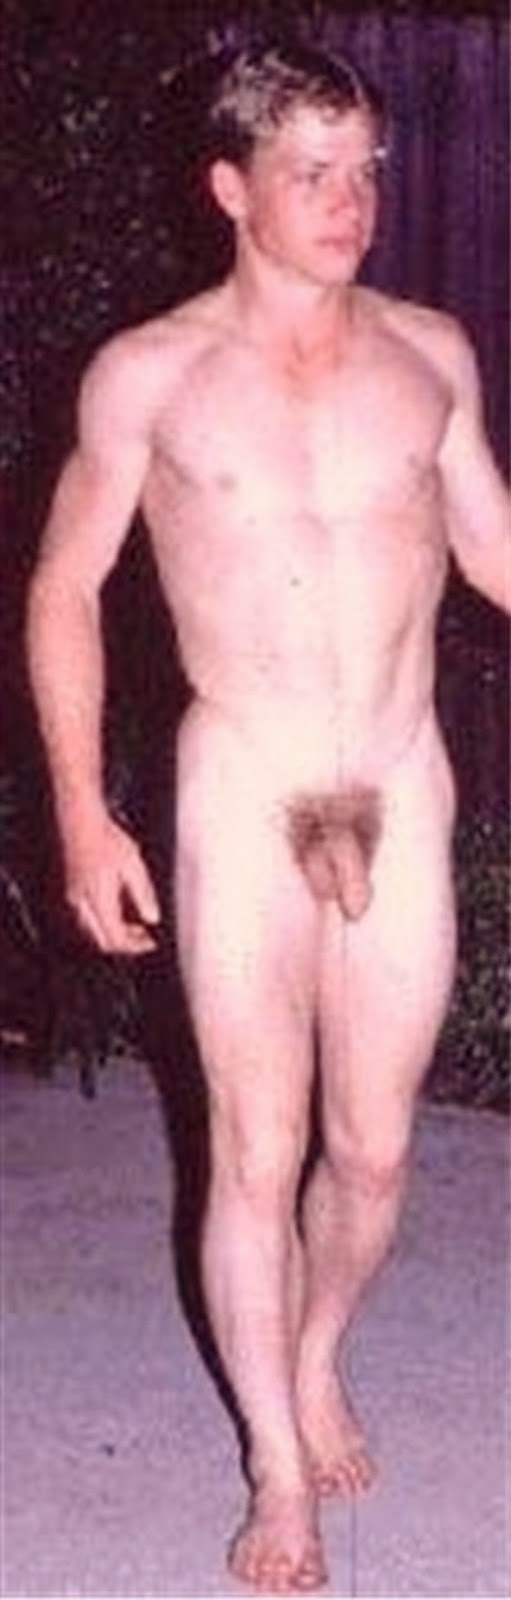 Ricky Schroder Naked White Cock Porn Pictures